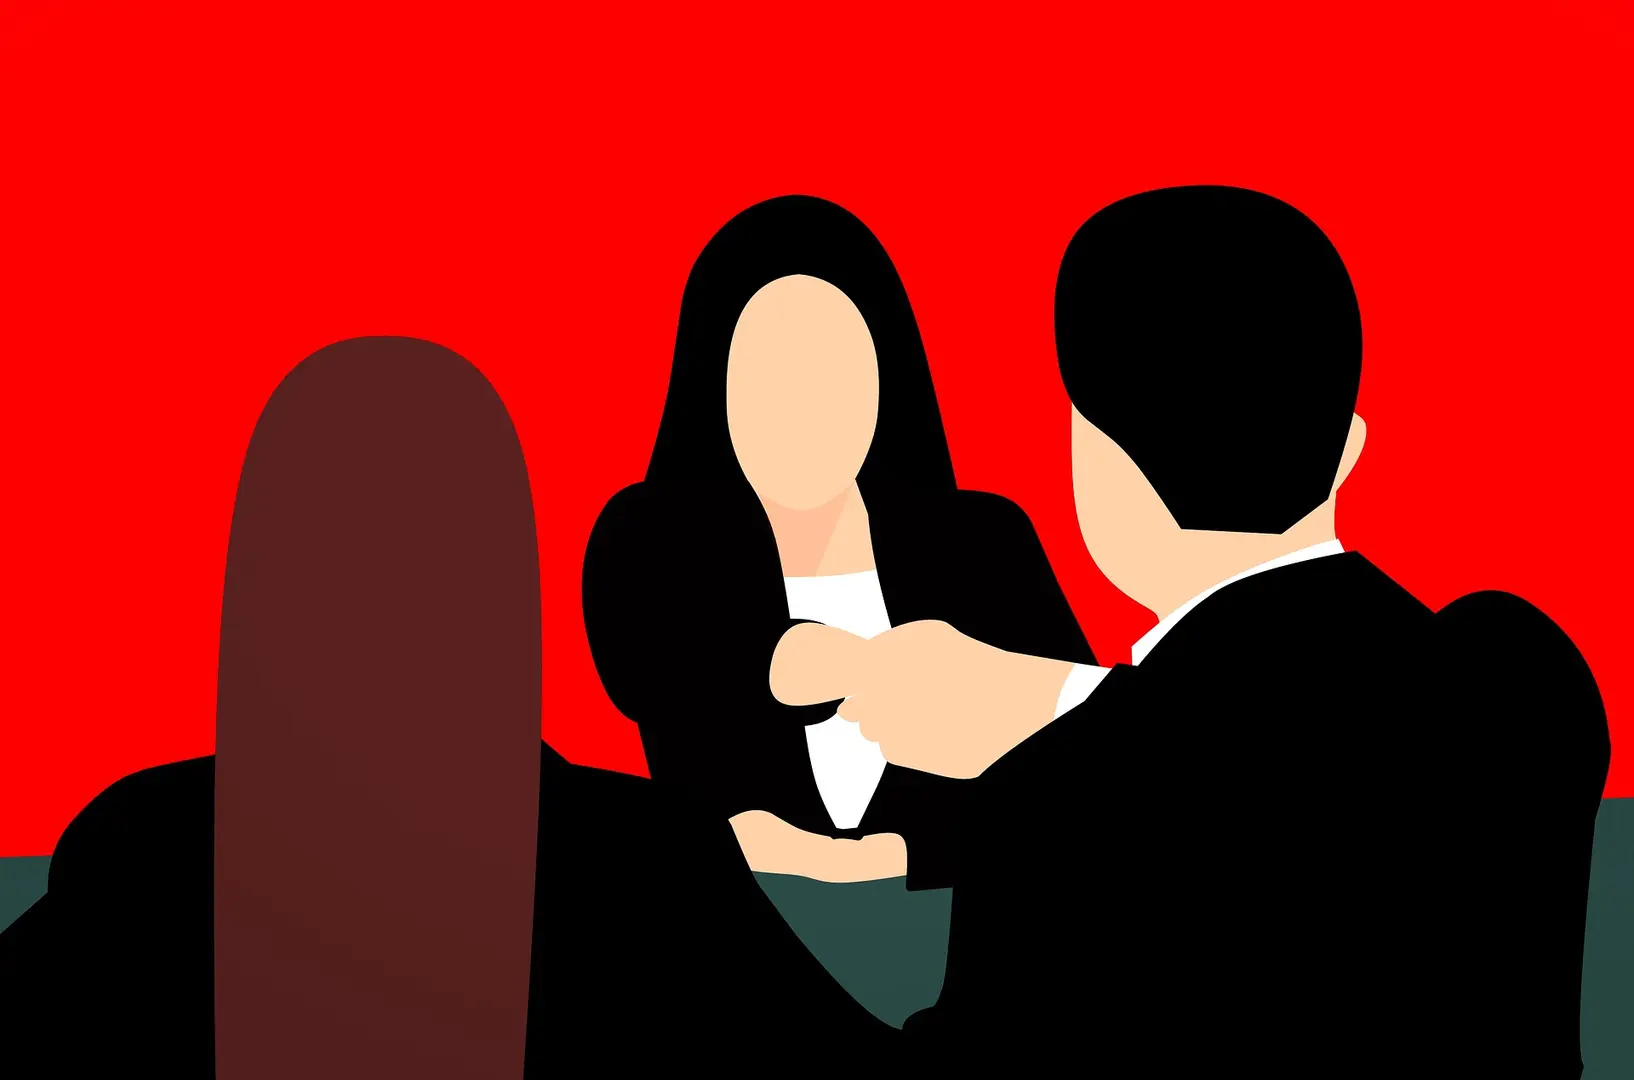 Two people shaking hands with a red background.